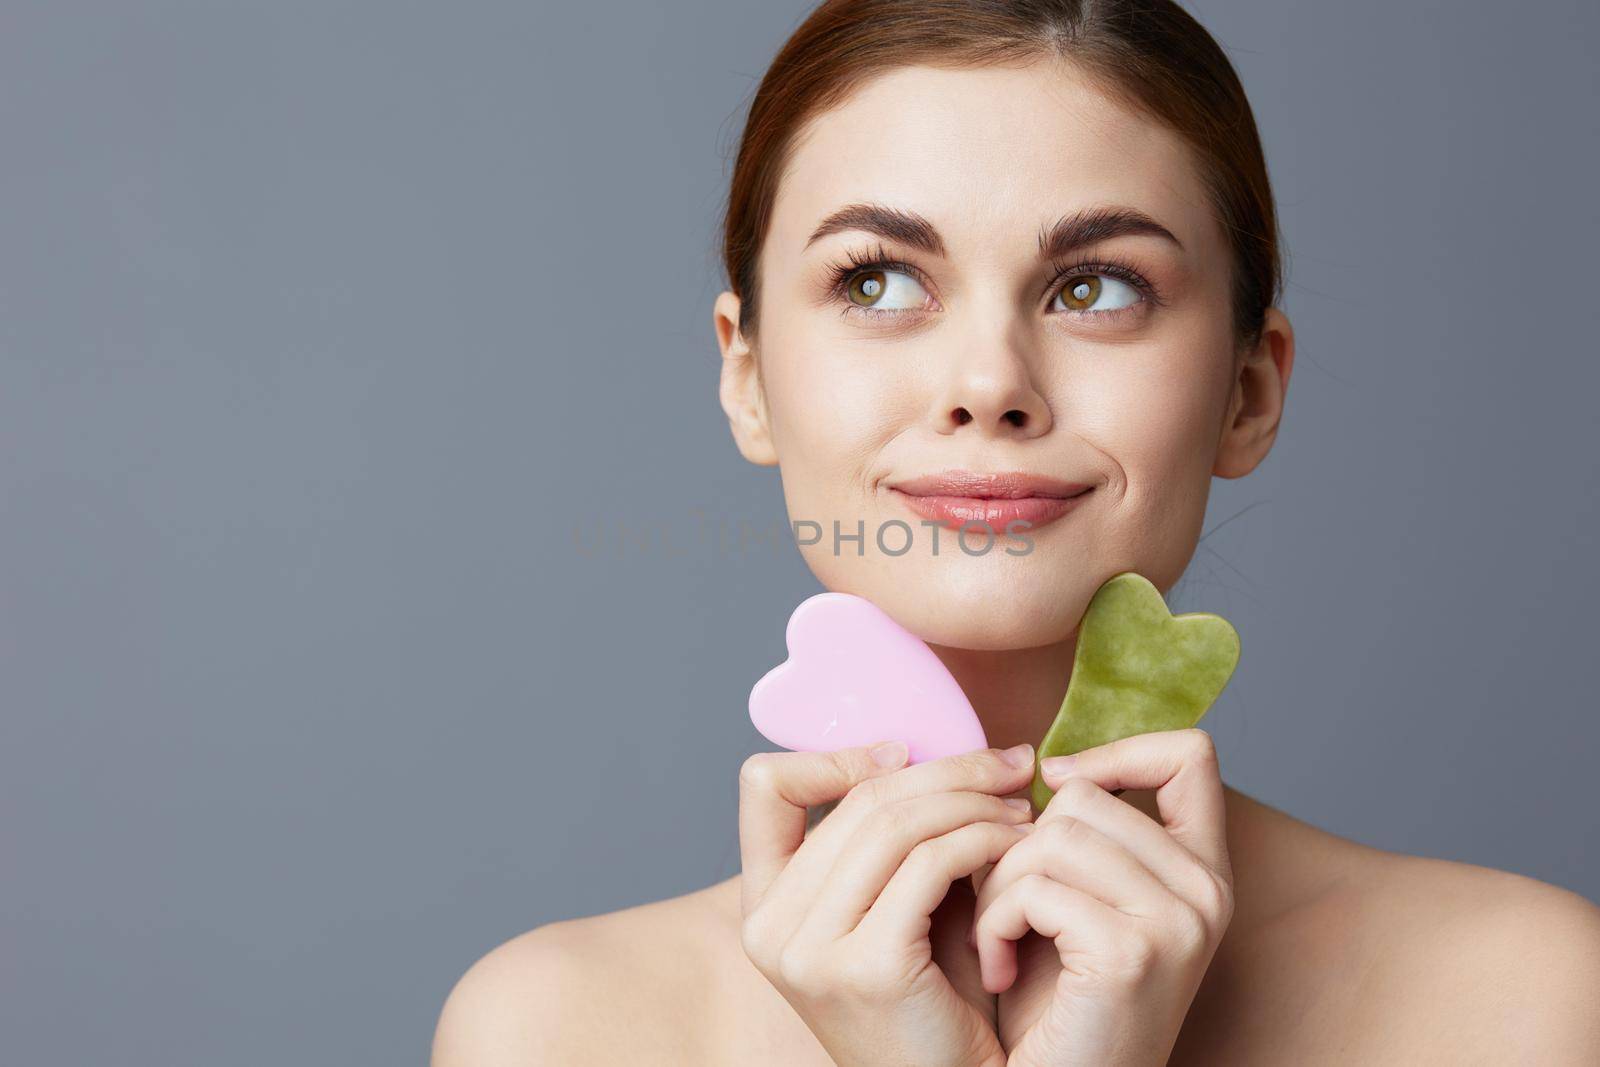 woman facial scraper skin care posing isolated background by SHOTPRIME